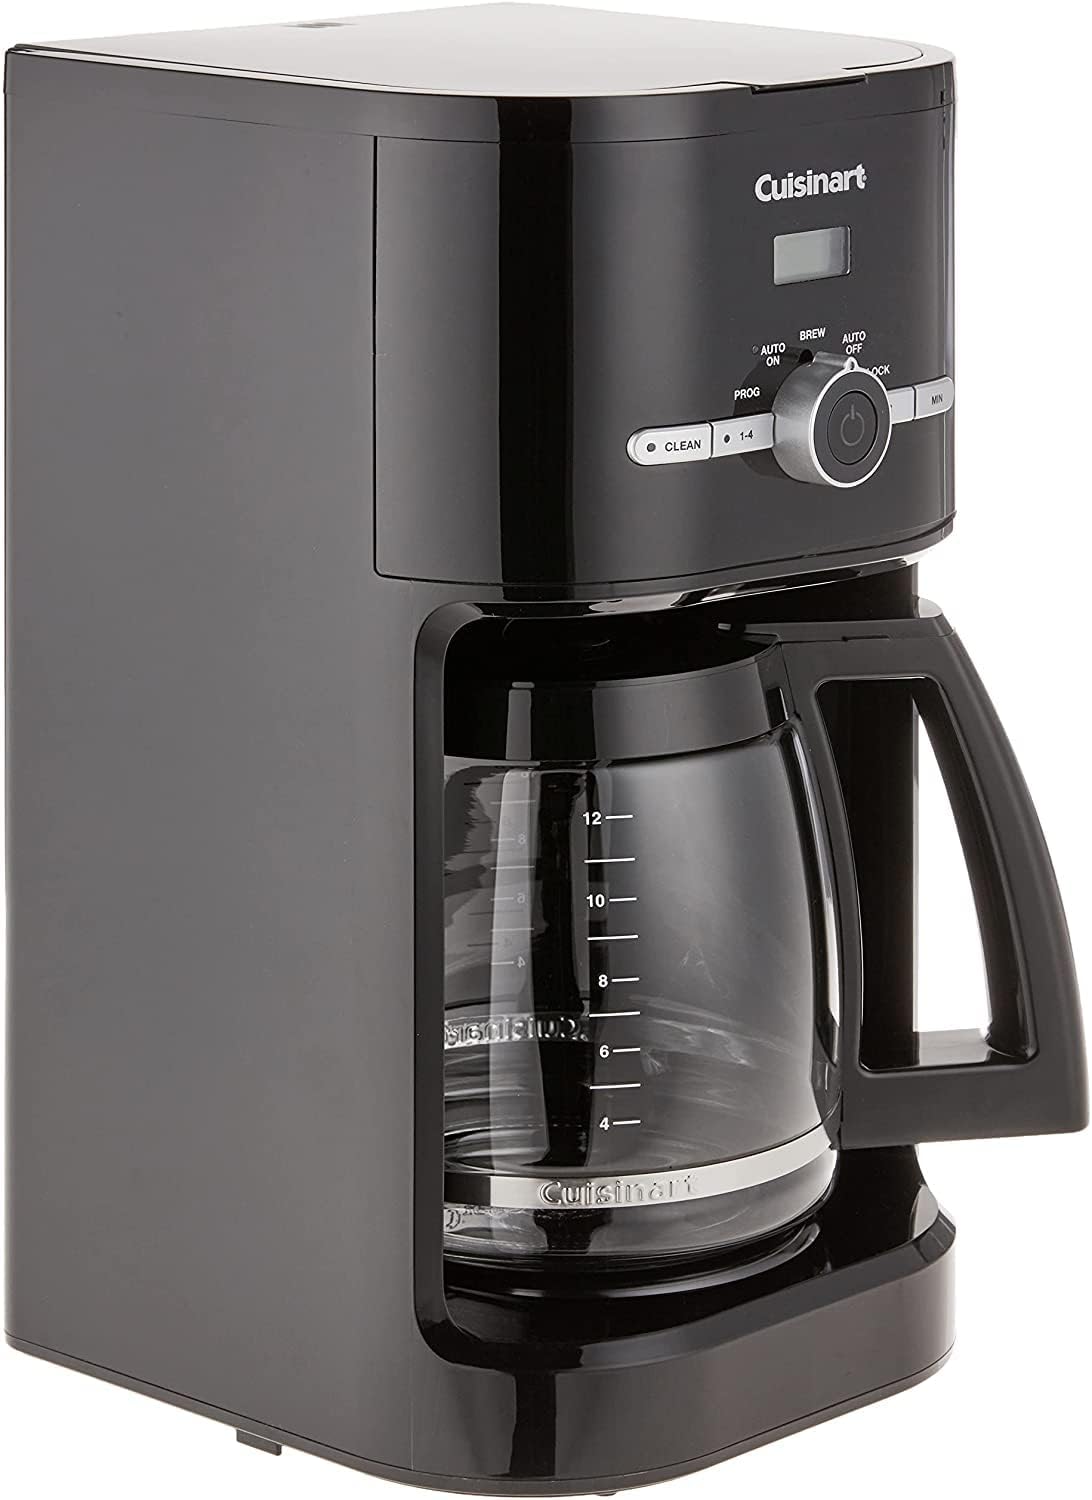 Cuisinart DCC-1170BK 10-Cup Thermal Classic™ Coffeemaker, Black with Thermal, 10-Cup, Programmable